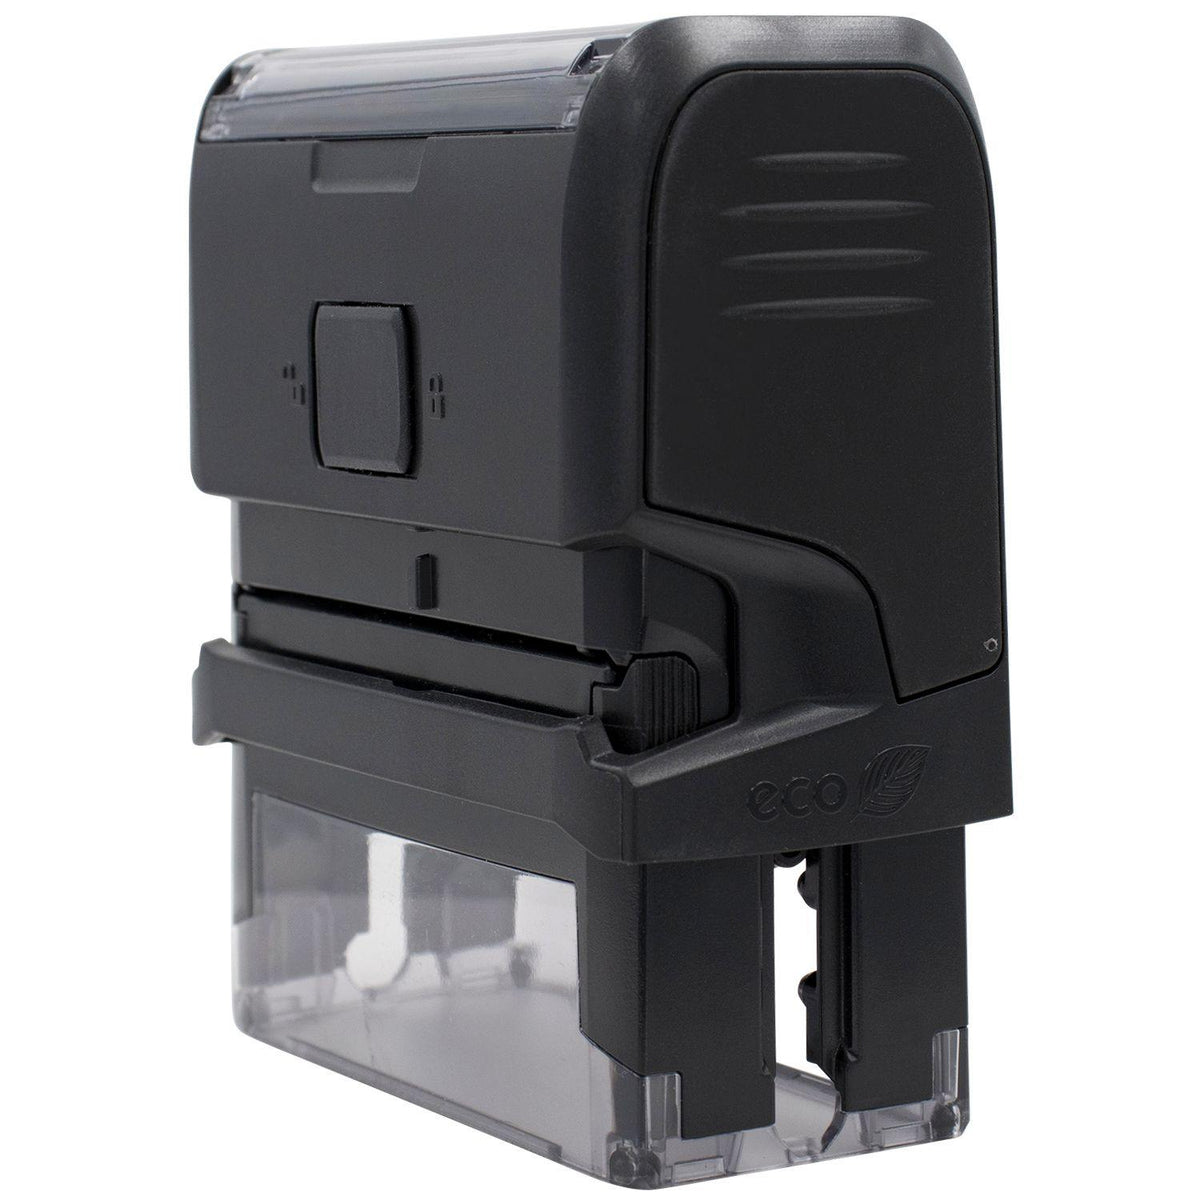 Large Self-Inking Copia Stamp - Engineer Seal Stamps - Brand_Trodat, Impression Size_Large, Stamp Type_Self-Inking Stamp, Type of Use_General, Type of Use_Office